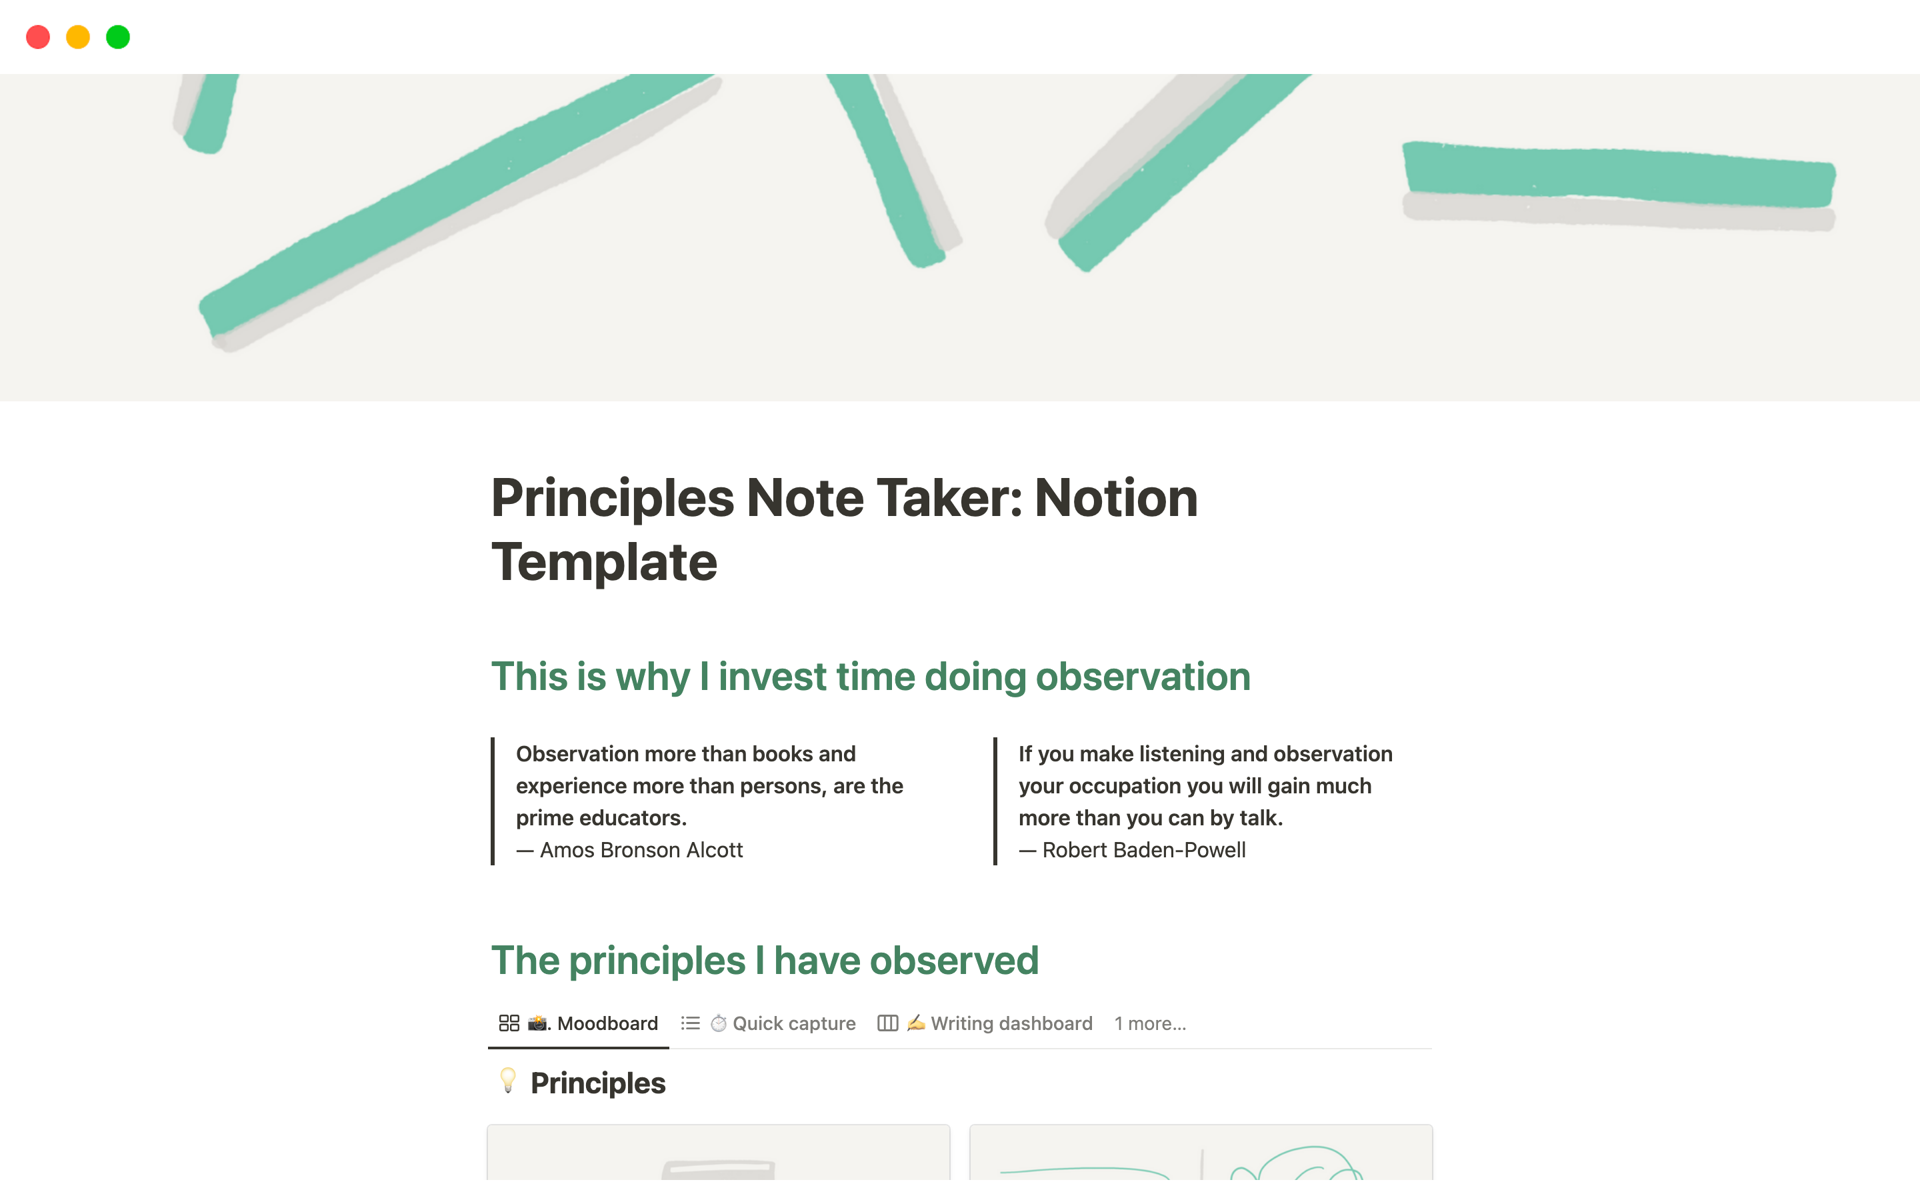 Create your own "Pinterest of Principles", where you can write, reflect on, and share your observed inspirations. 